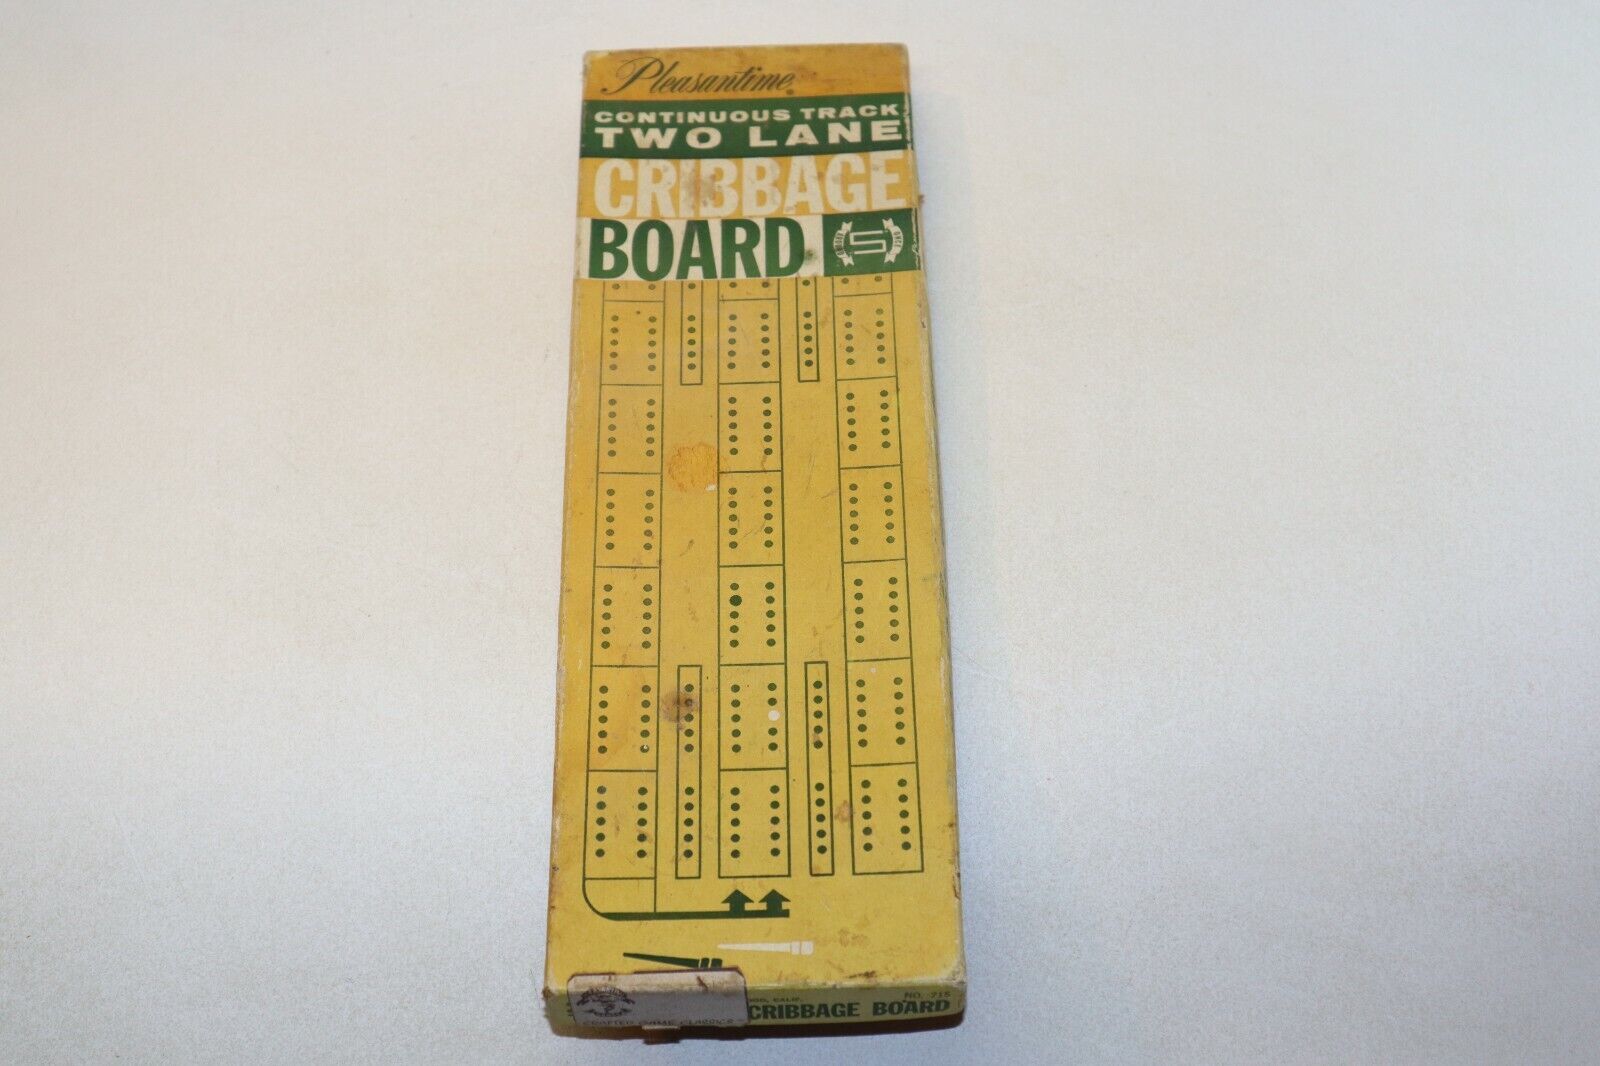 Pacific Game Co Pleasantime #715 Continuous Track Two Lane Cribbage Board 1967 - $12.86